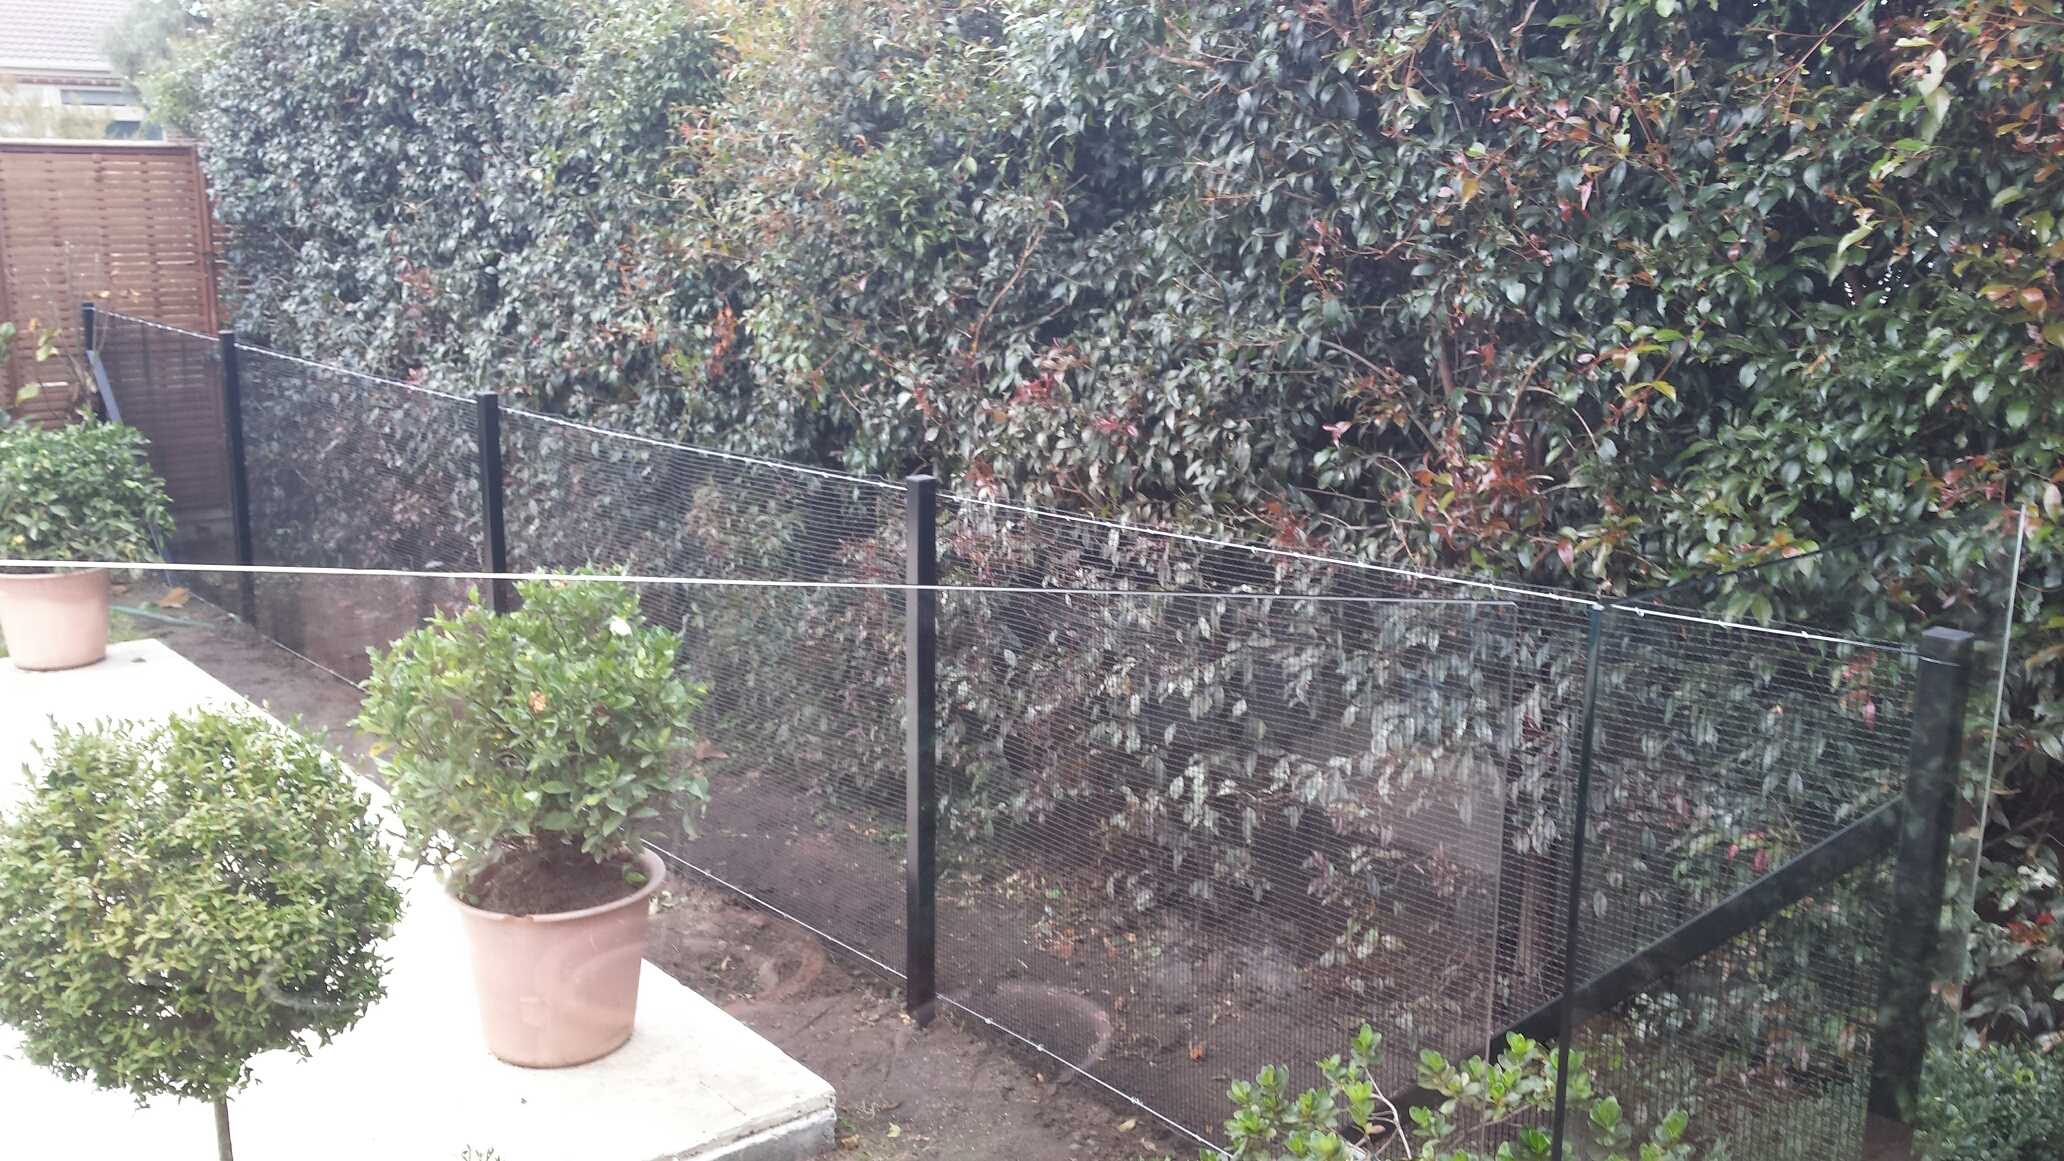 PVC Coated Welded Wire Mesh - Pool Fencing